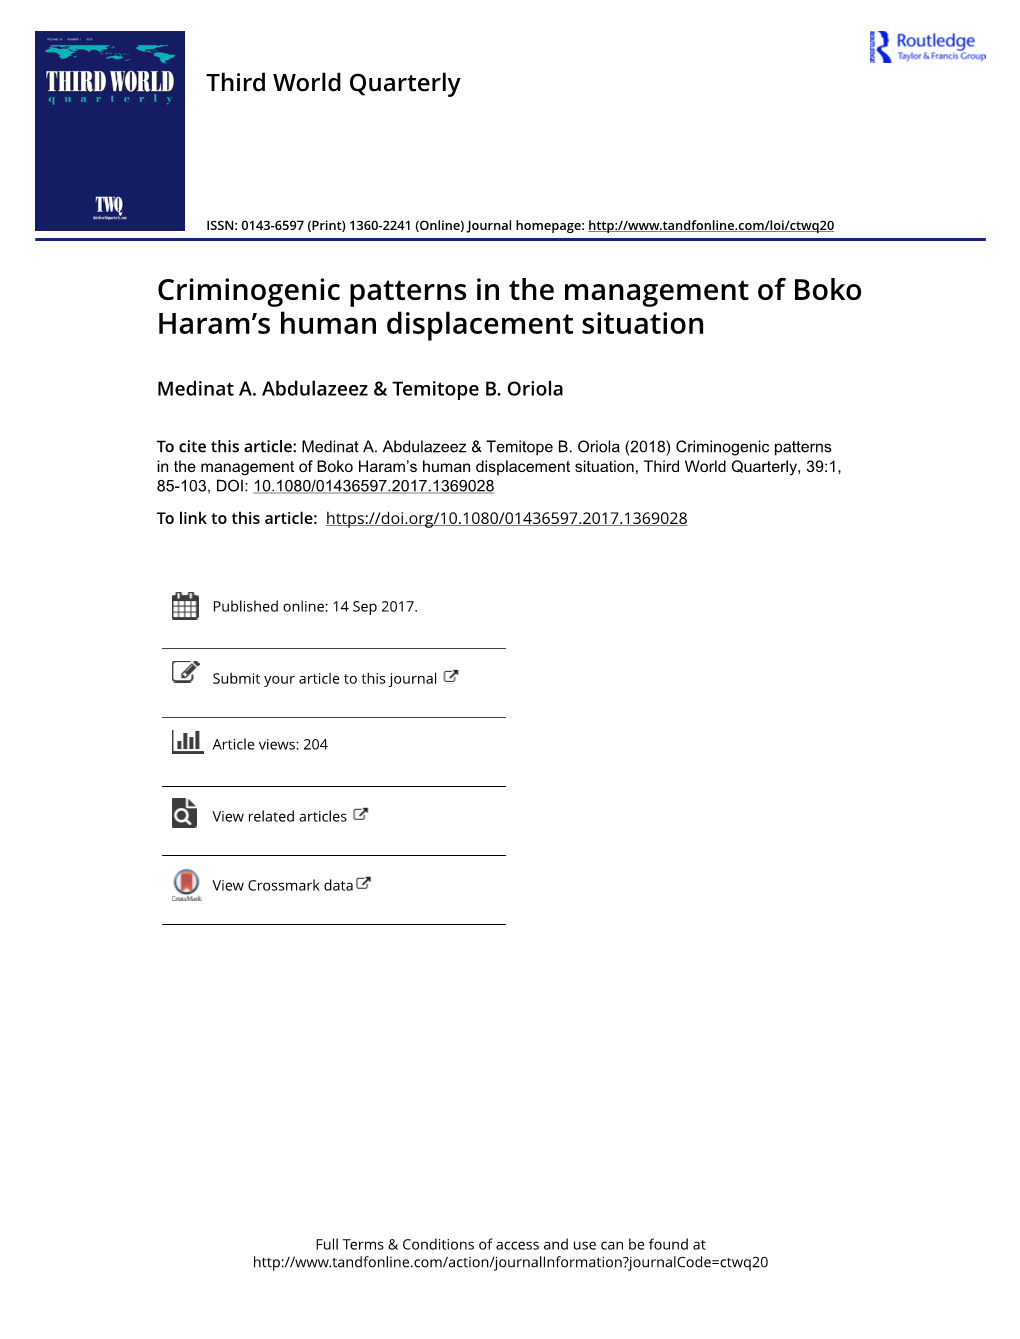 Criminogenic Patterns in the Management of Boko Haram's